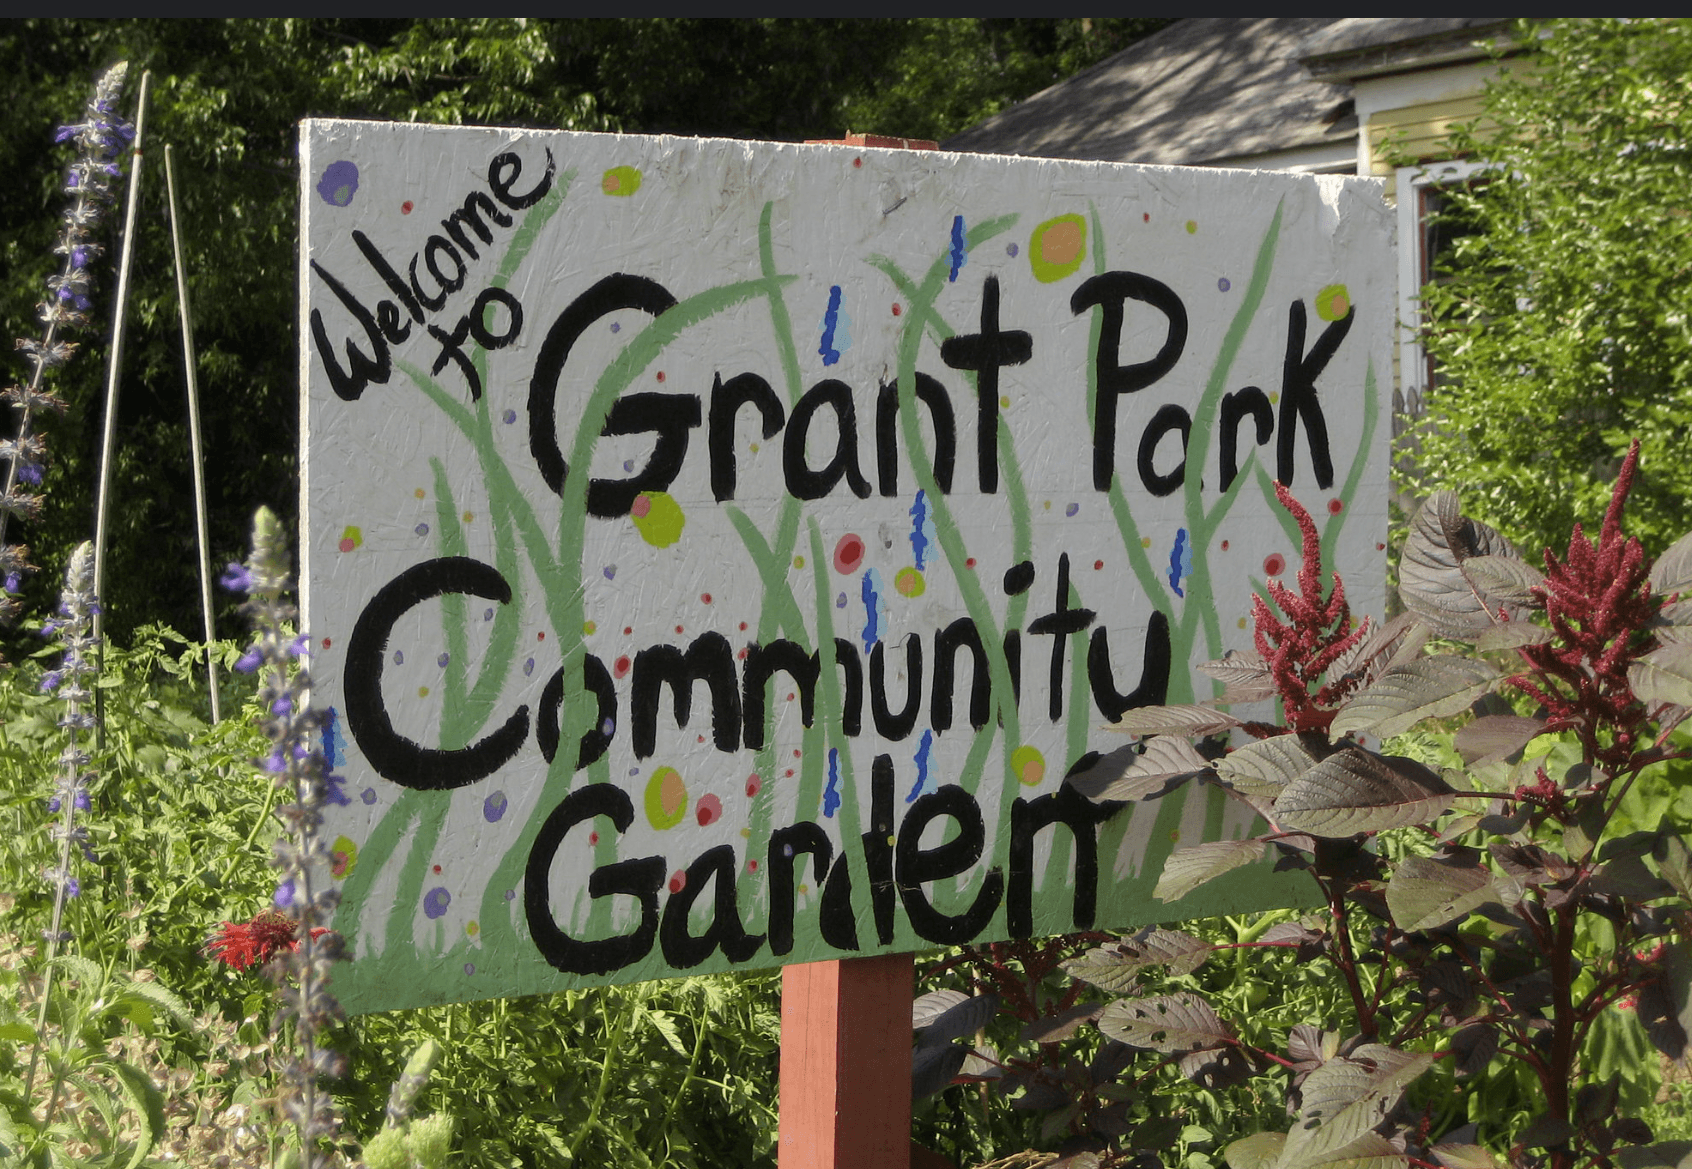 A pretty, hand-painted sign welcomes everyone to a community garden full of flowering plants.